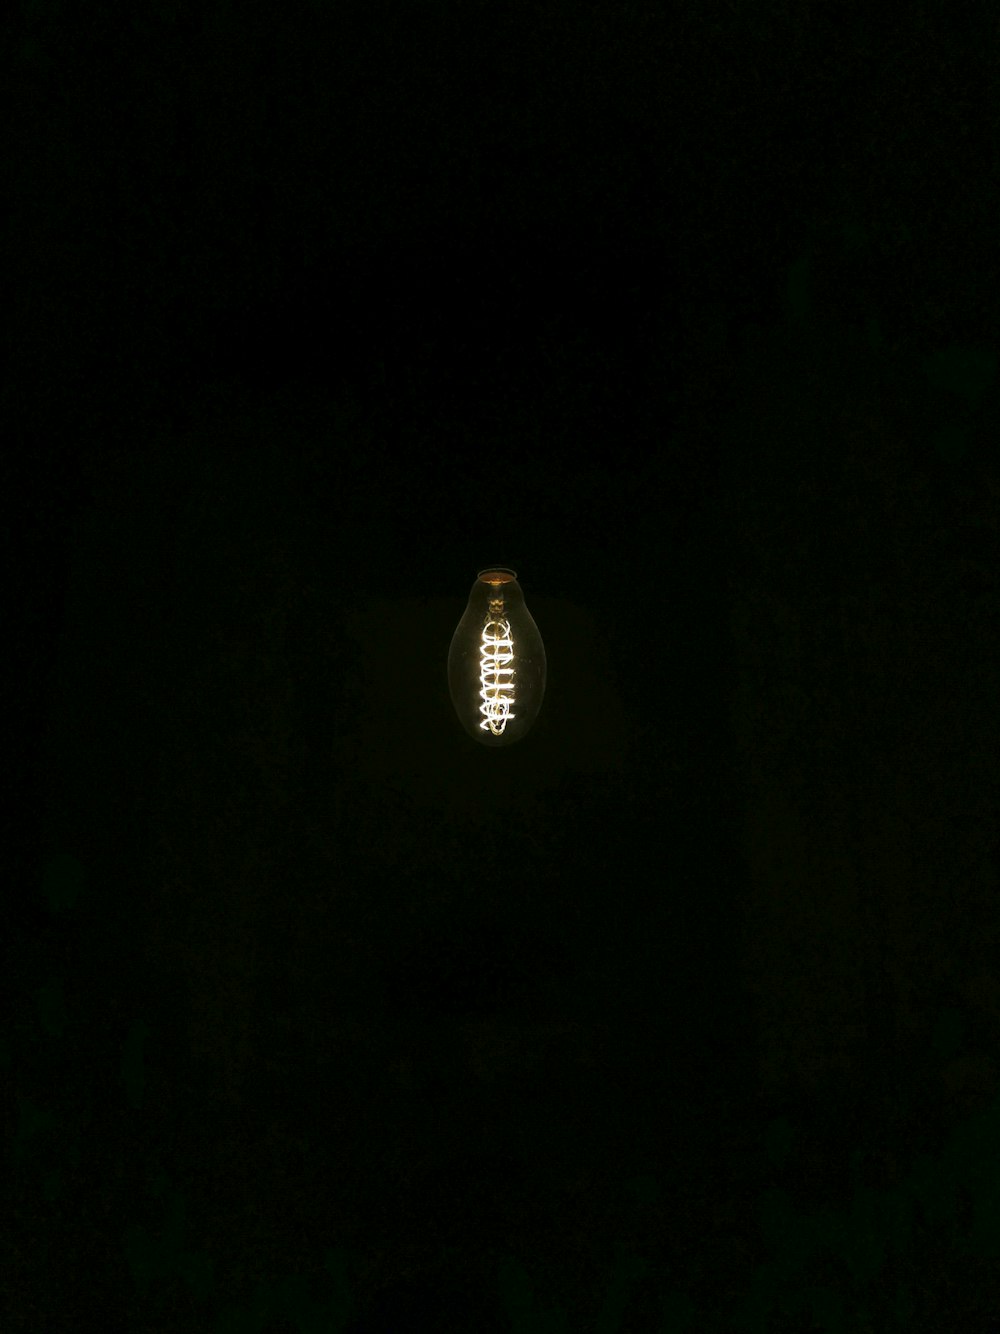 a light bulb is lit up in the dark